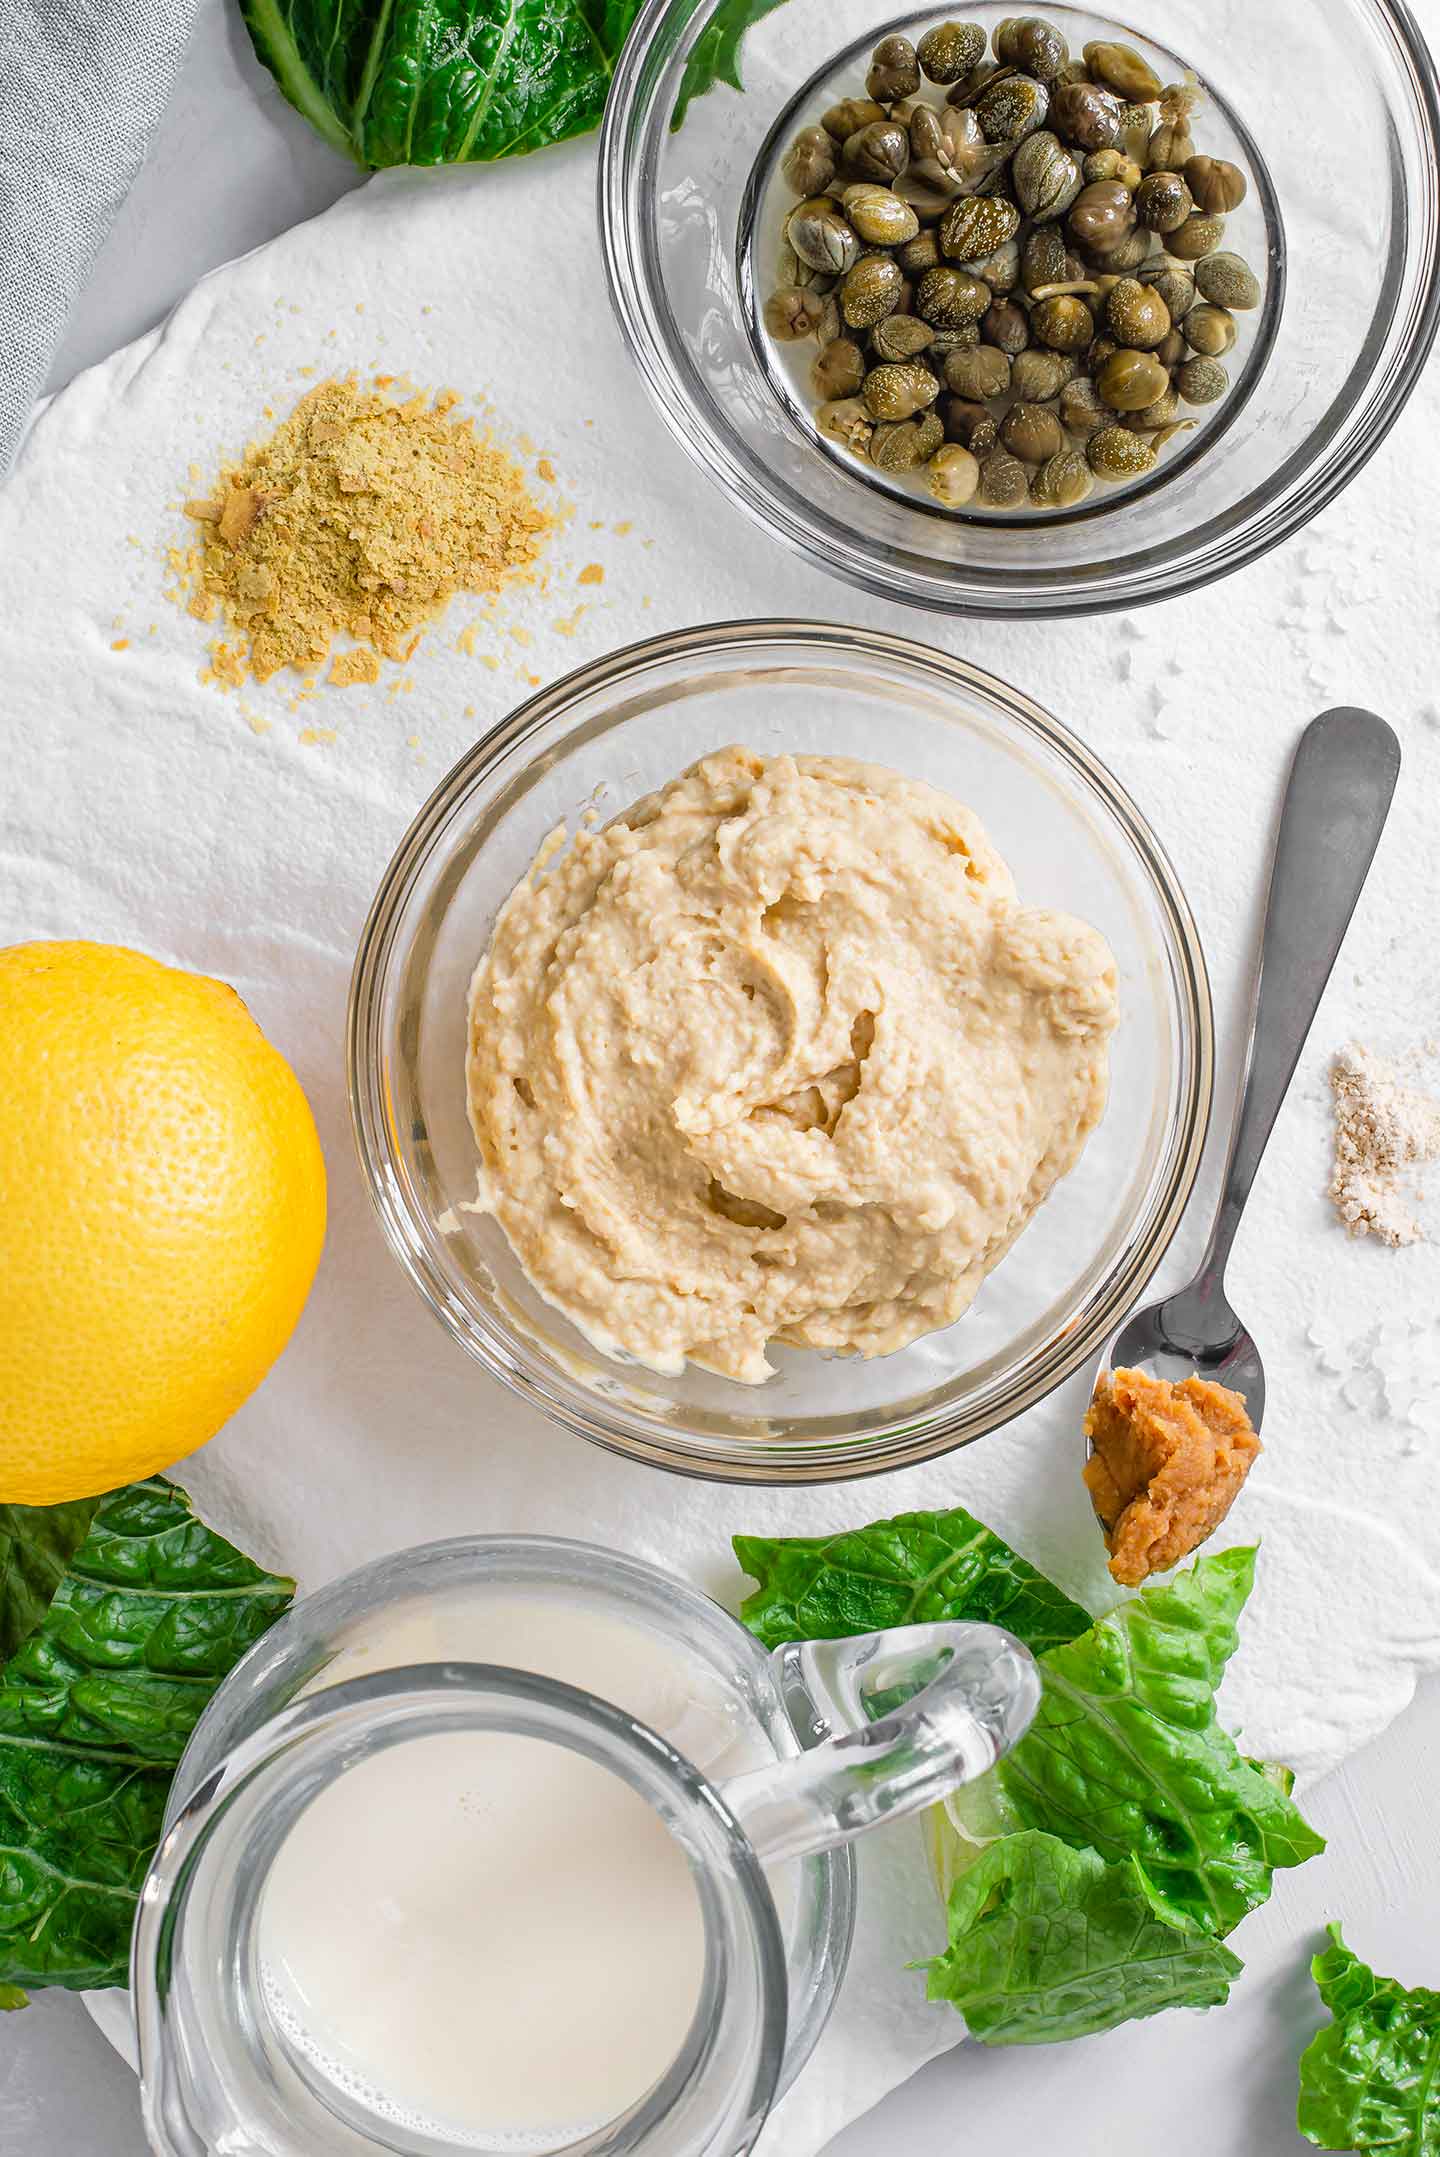 Top down view of ingredients for a vegan caesar salad dressing recipe. Hummus, milk, capers, a lemon, nutritional yeast and spices are scattered on a white tray.